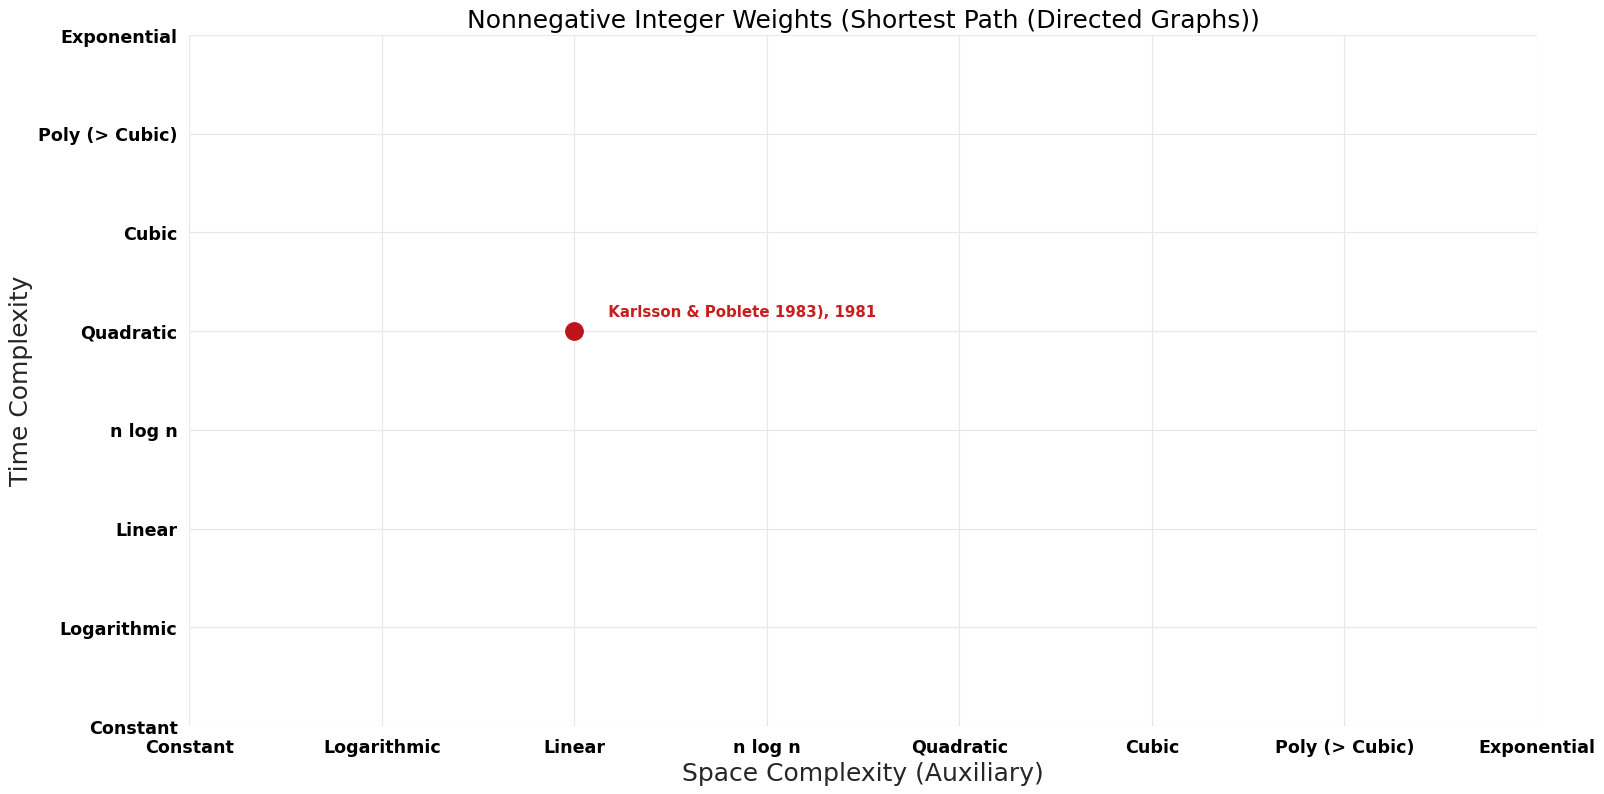 Shortest Path (Directed Graphs) - Nonnegative Integer Weights - Pareto Frontier.png